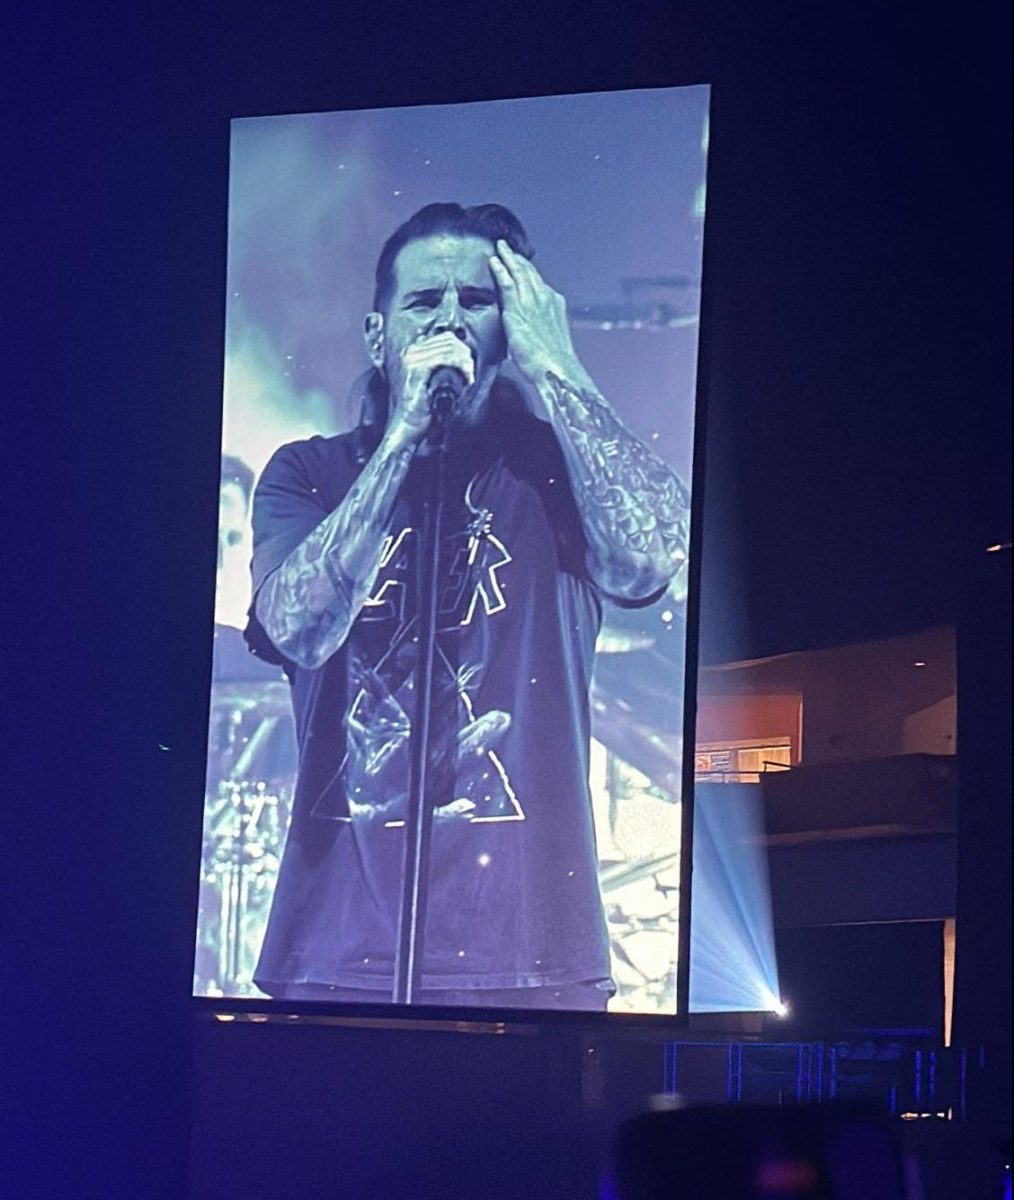 Take the time to listen \ M. Shadows performs Buried Alive in front of 14,000 people. Buried Alive is one of their popular songs from the album Nightmare, and the song is about people being buried alive under their emotions after bottling them up for ages.